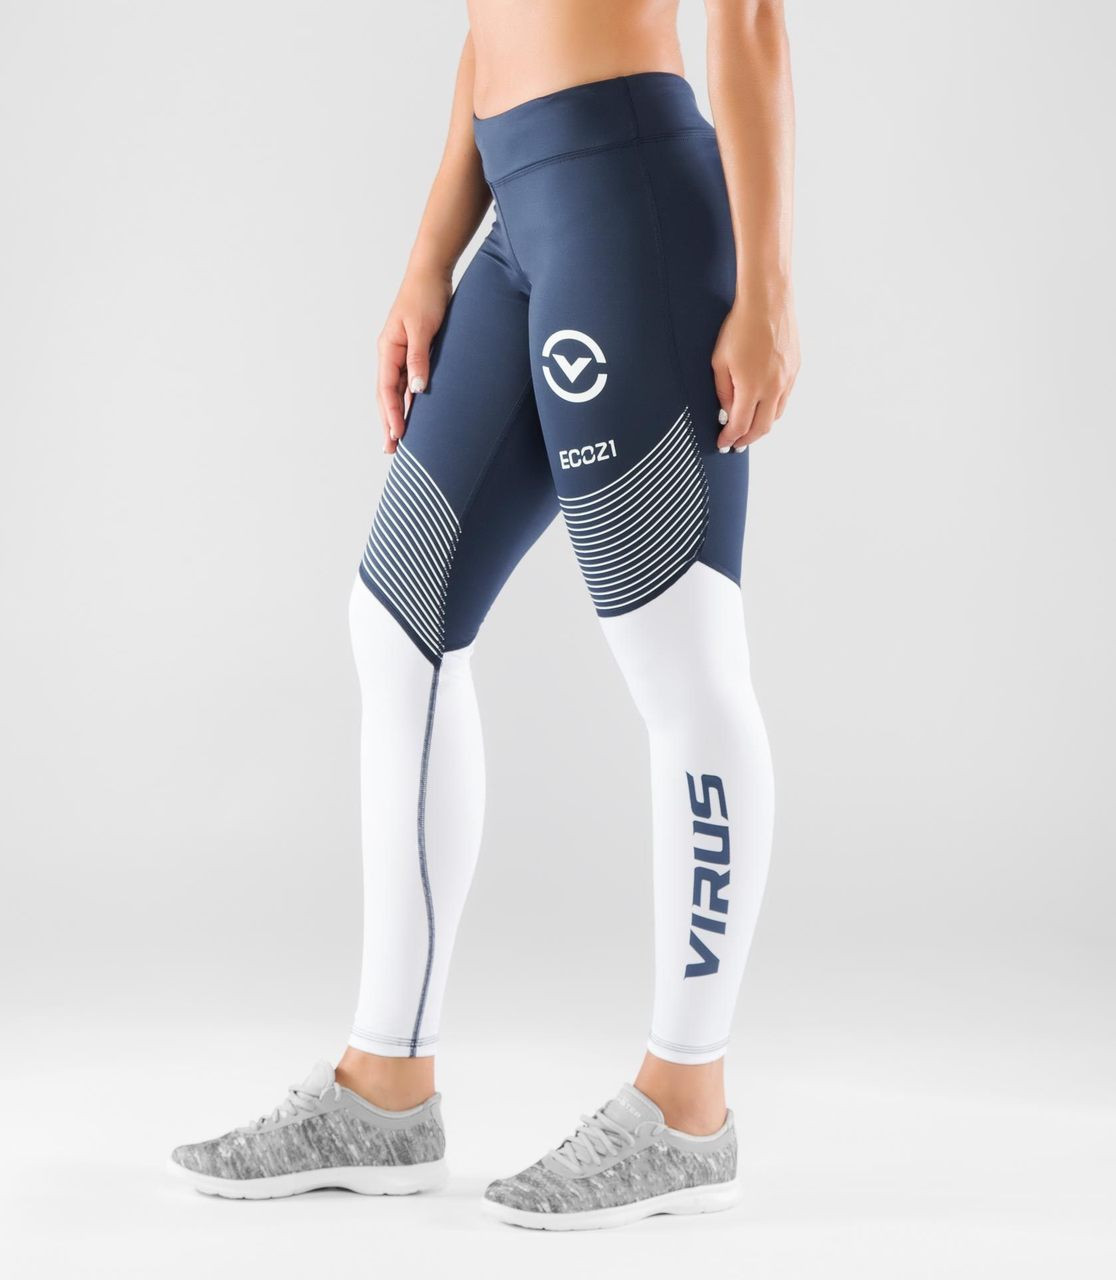 VIRUS WOMEN'S STAY COOL V2 COMPRESSION PANT (ECO21.5)- NAVY/WHITE